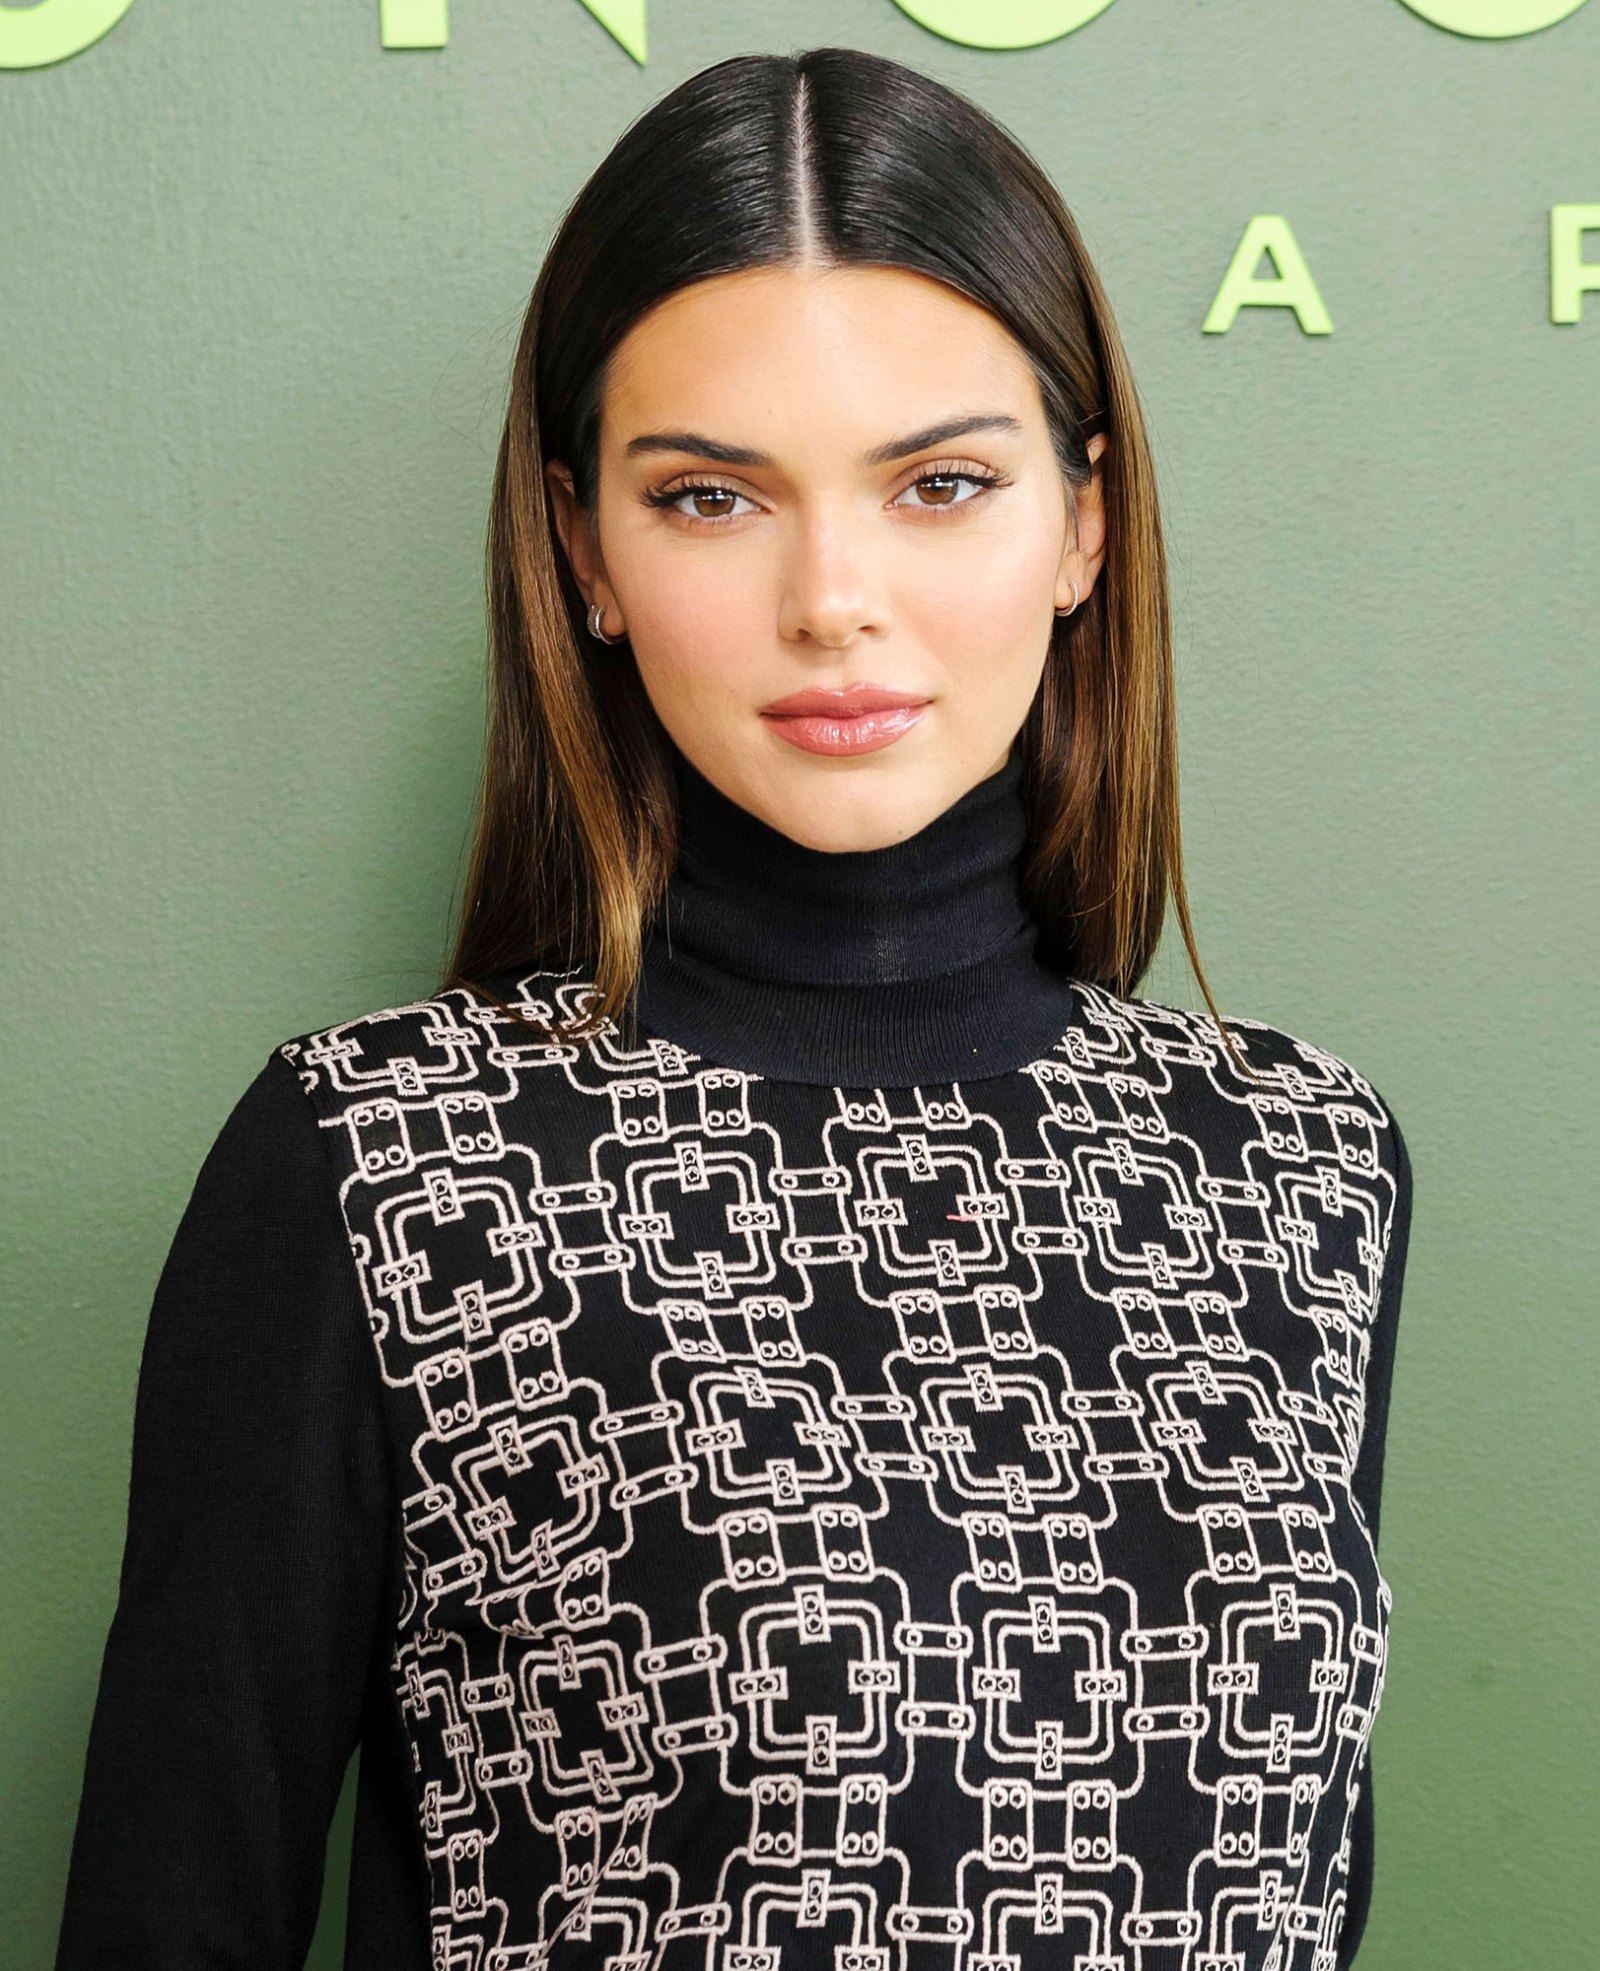 Kendall Jenner attends NYFW Fall/Winter 2020 Everything Kendall Jenner Has Said About Relationships Through the Years